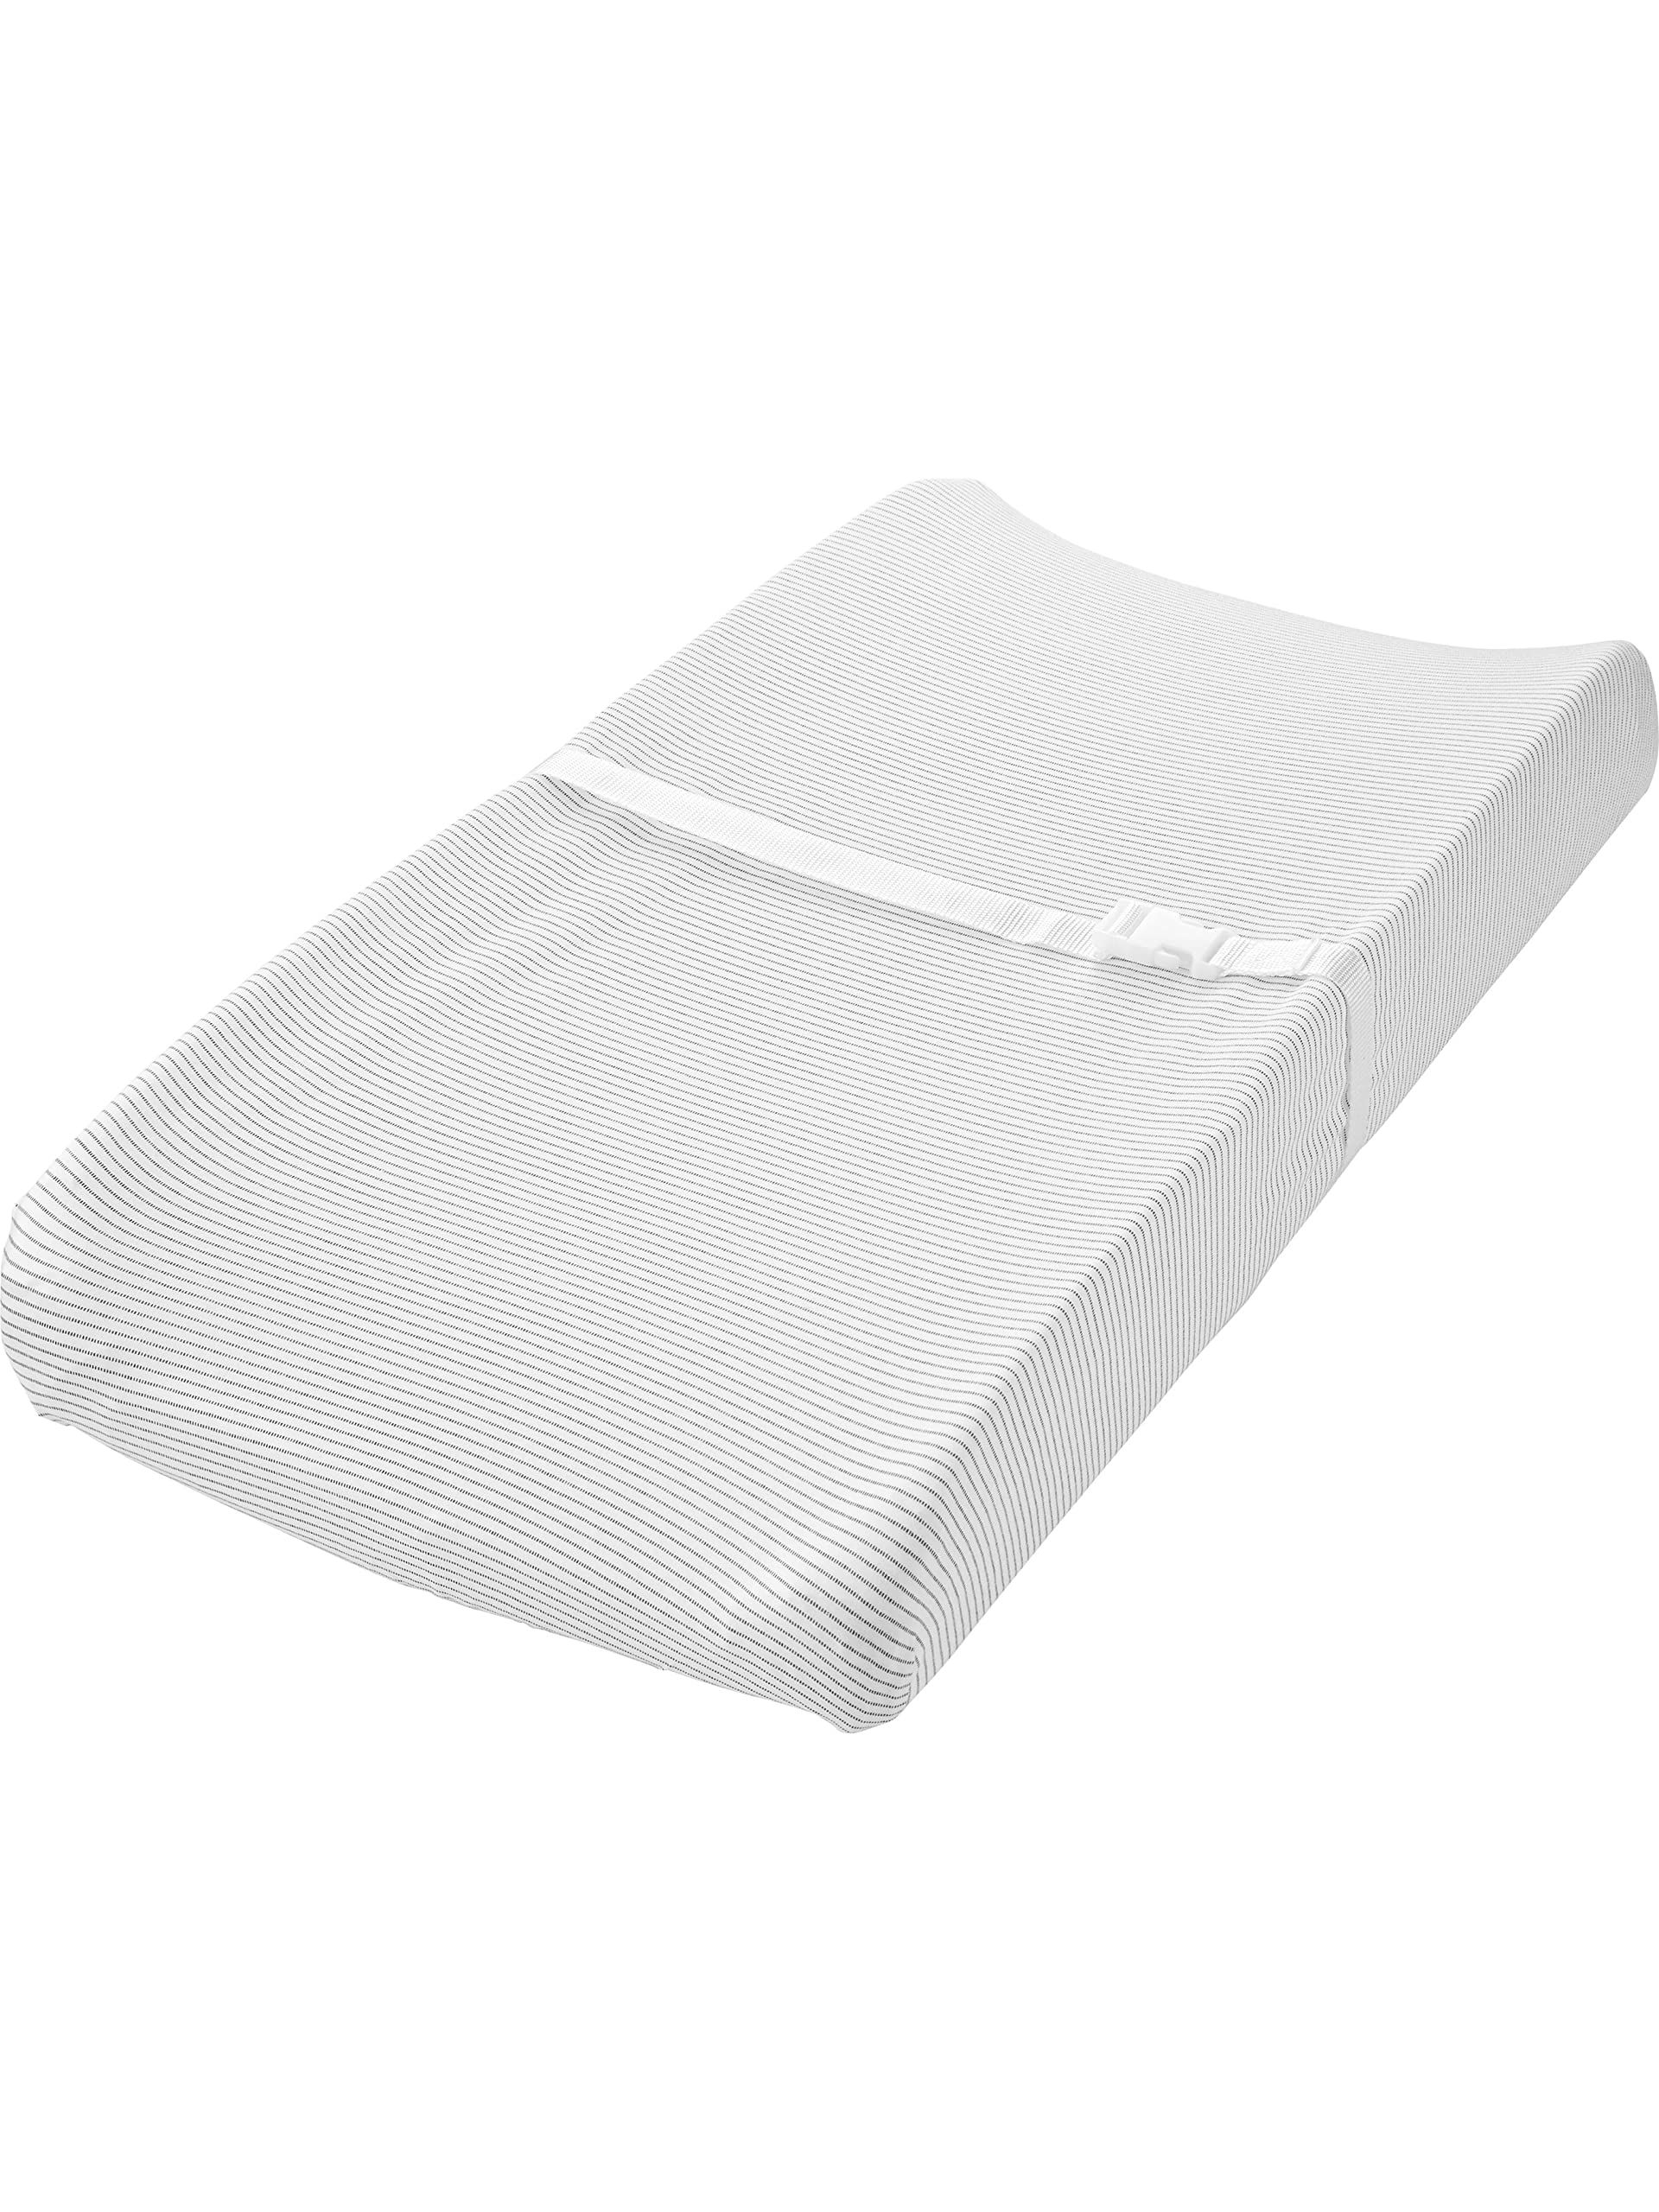 Simple Joys by Carter's Kids' Baby 2-Pack Cotton Changing Pad Covers